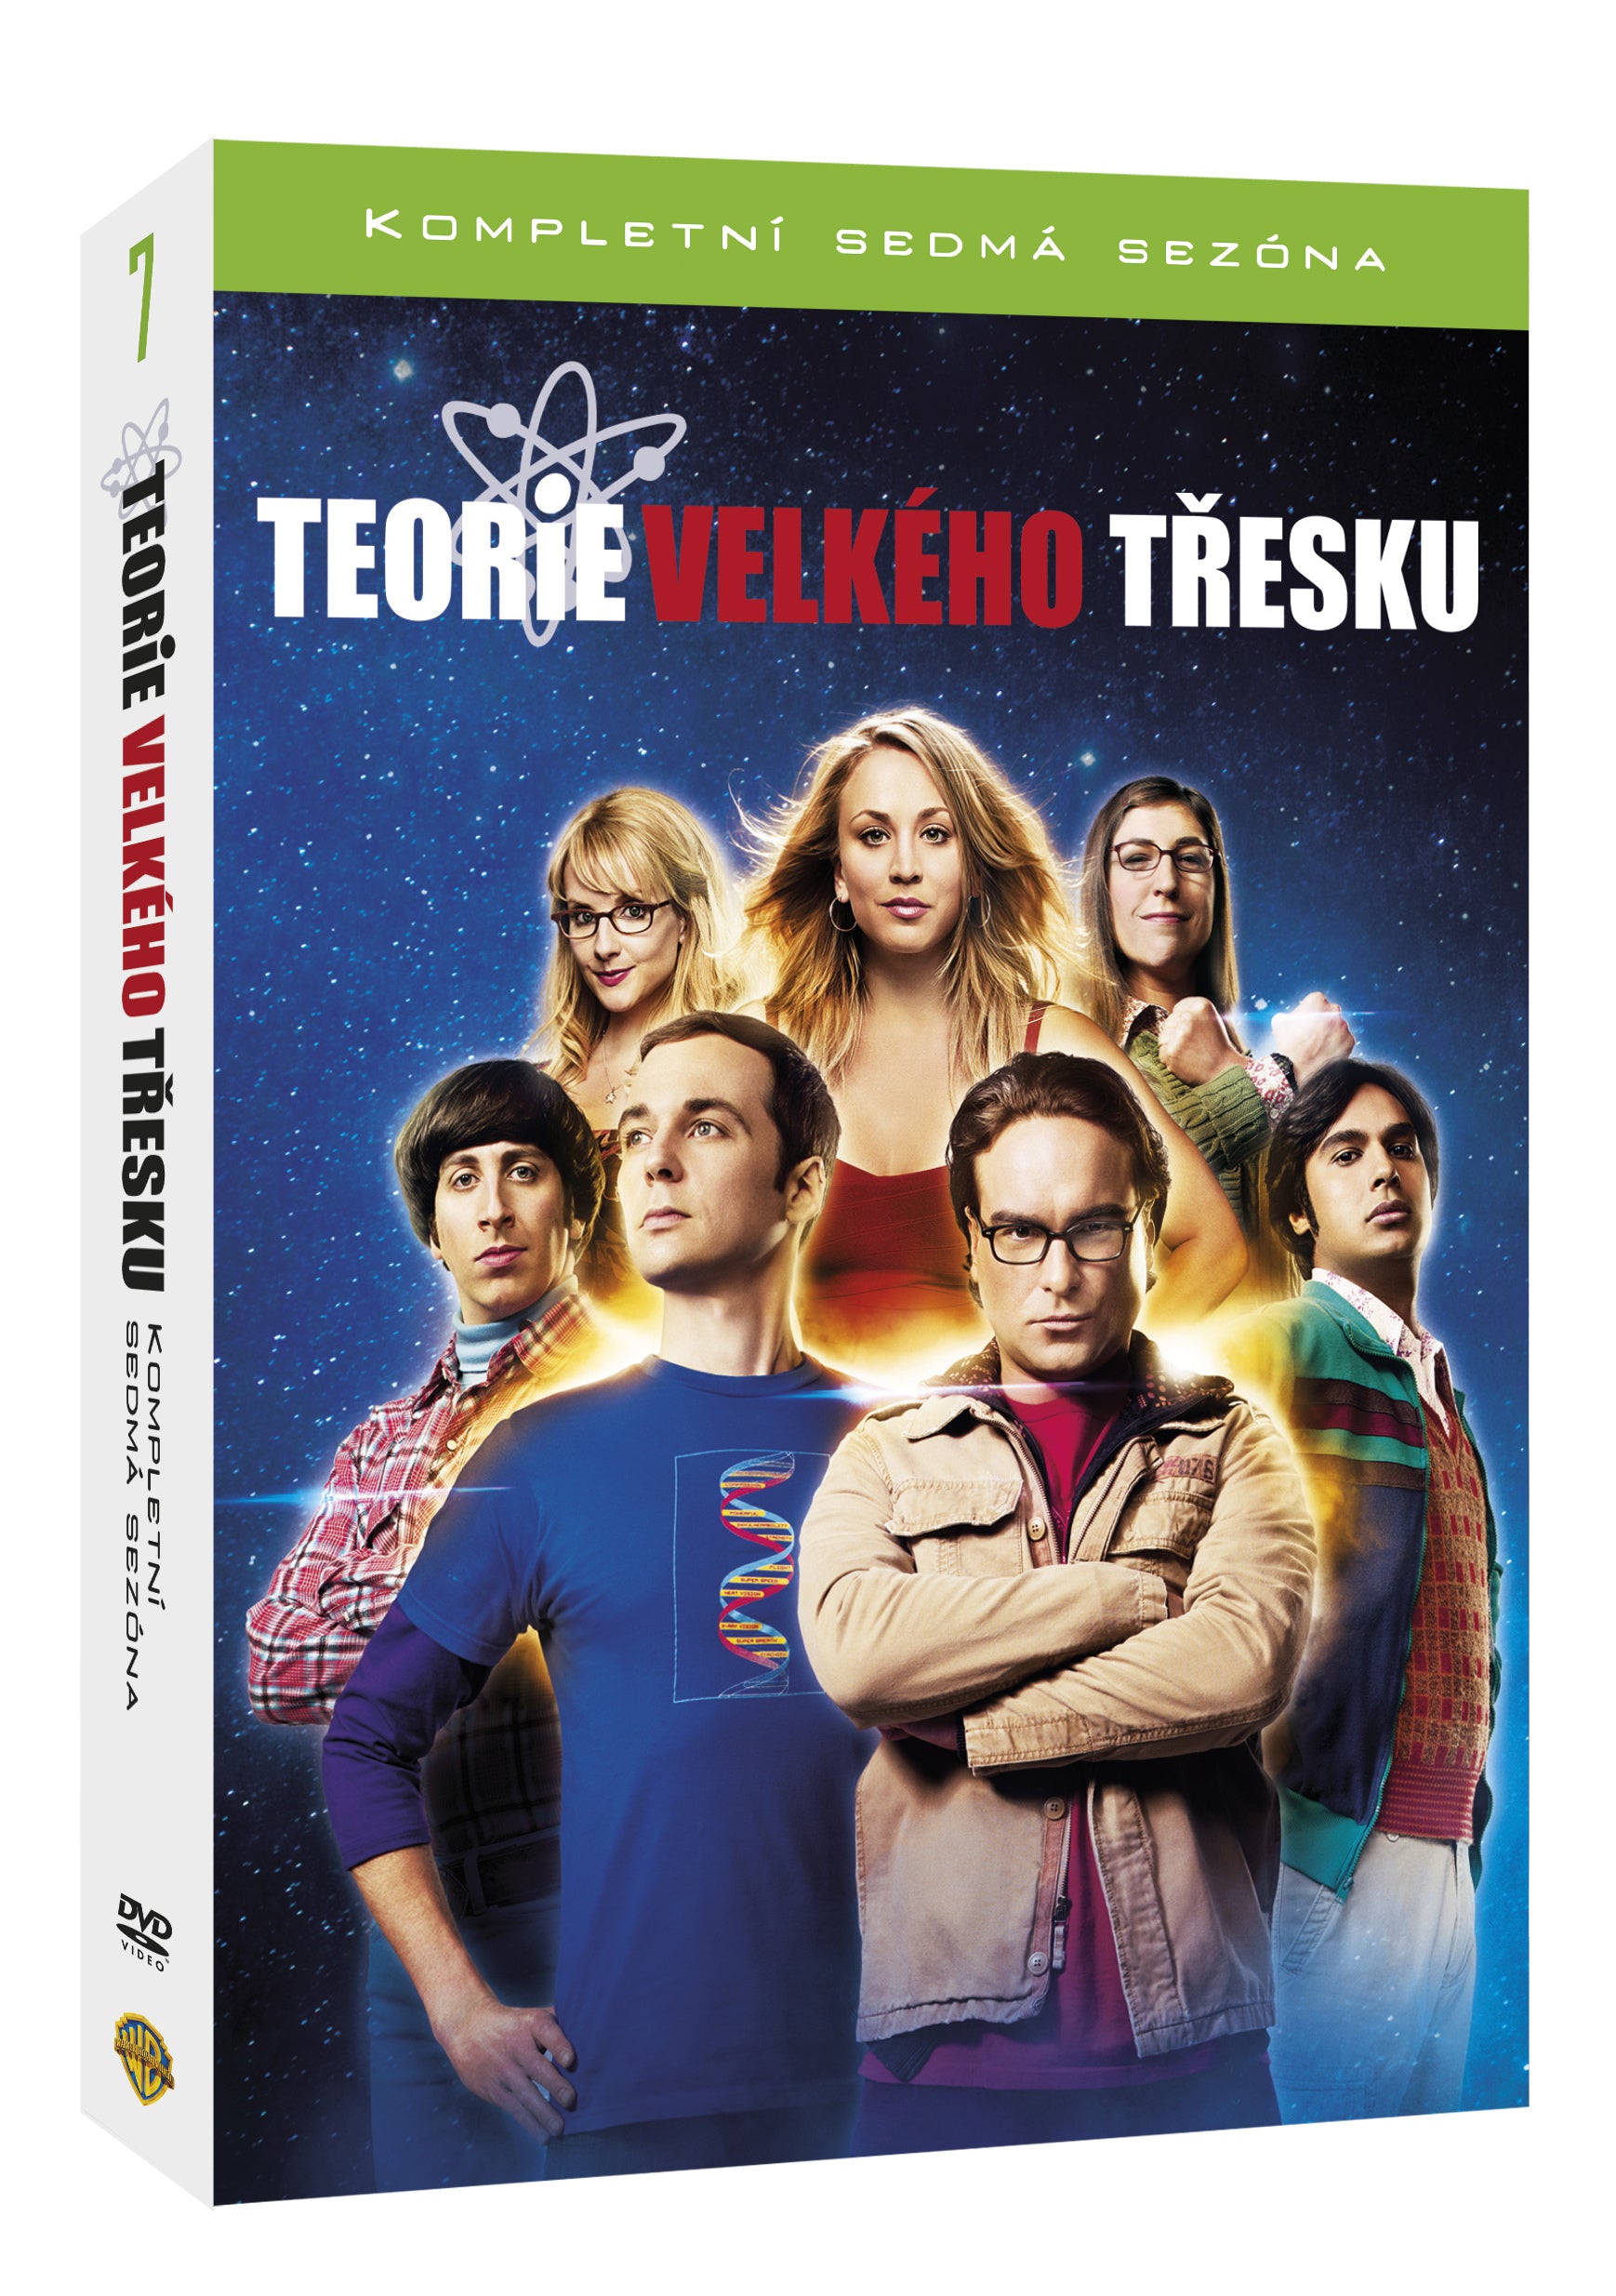 Theory of the 7.Serie 3DVD / Big Bang Theory Staffel 7